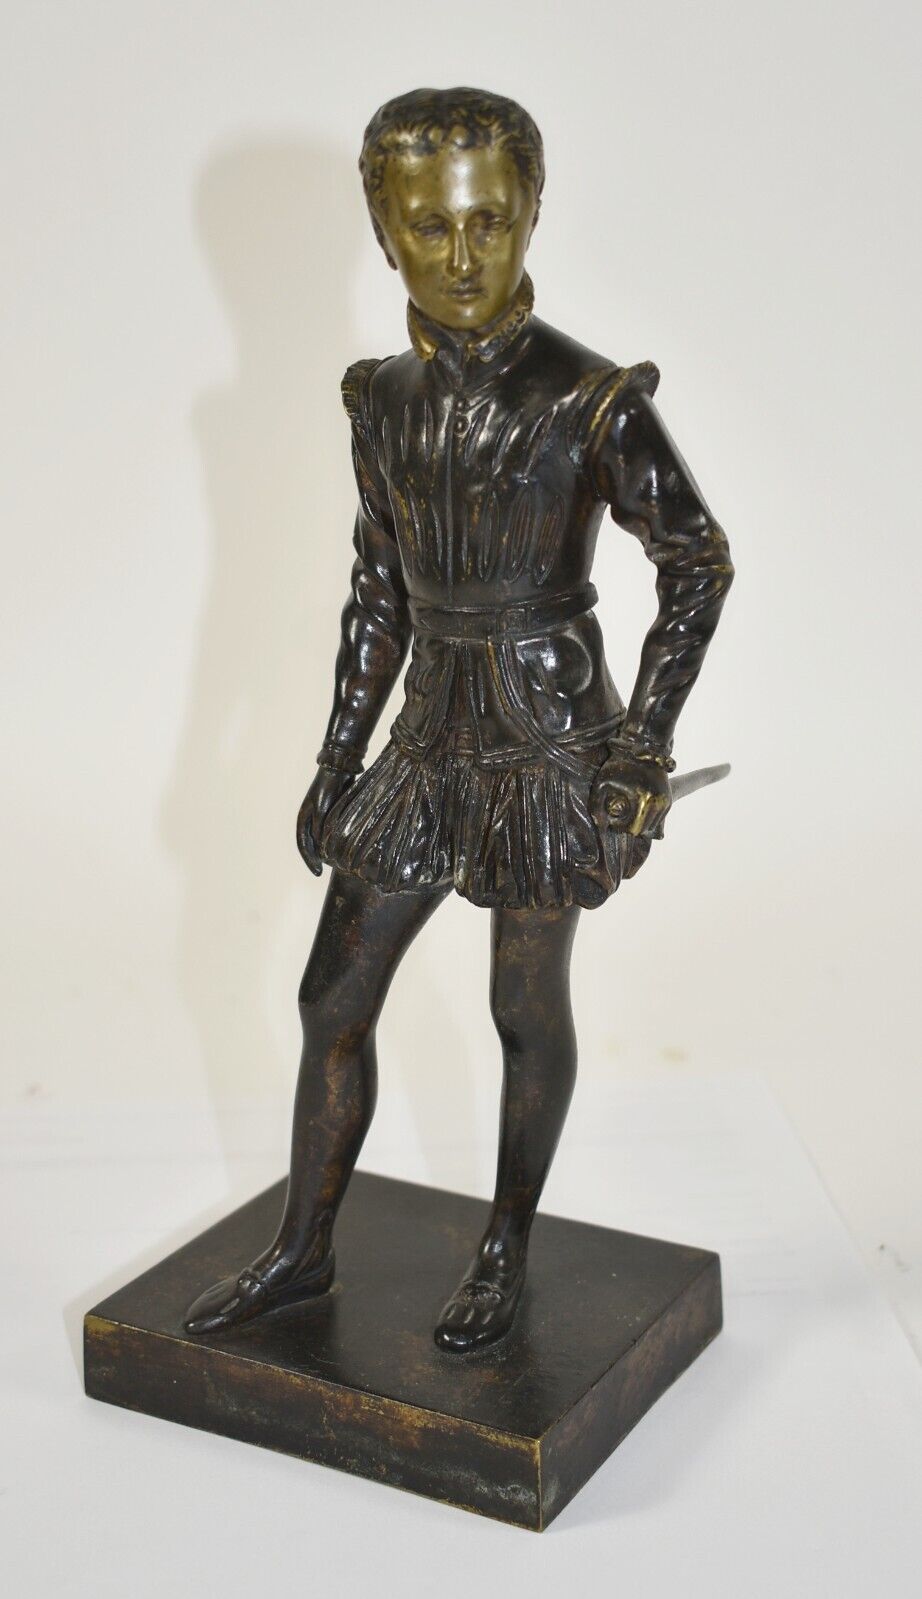 Antique Figural Bronze of Young Price Henry IV by Francois Bosio 1768-1845